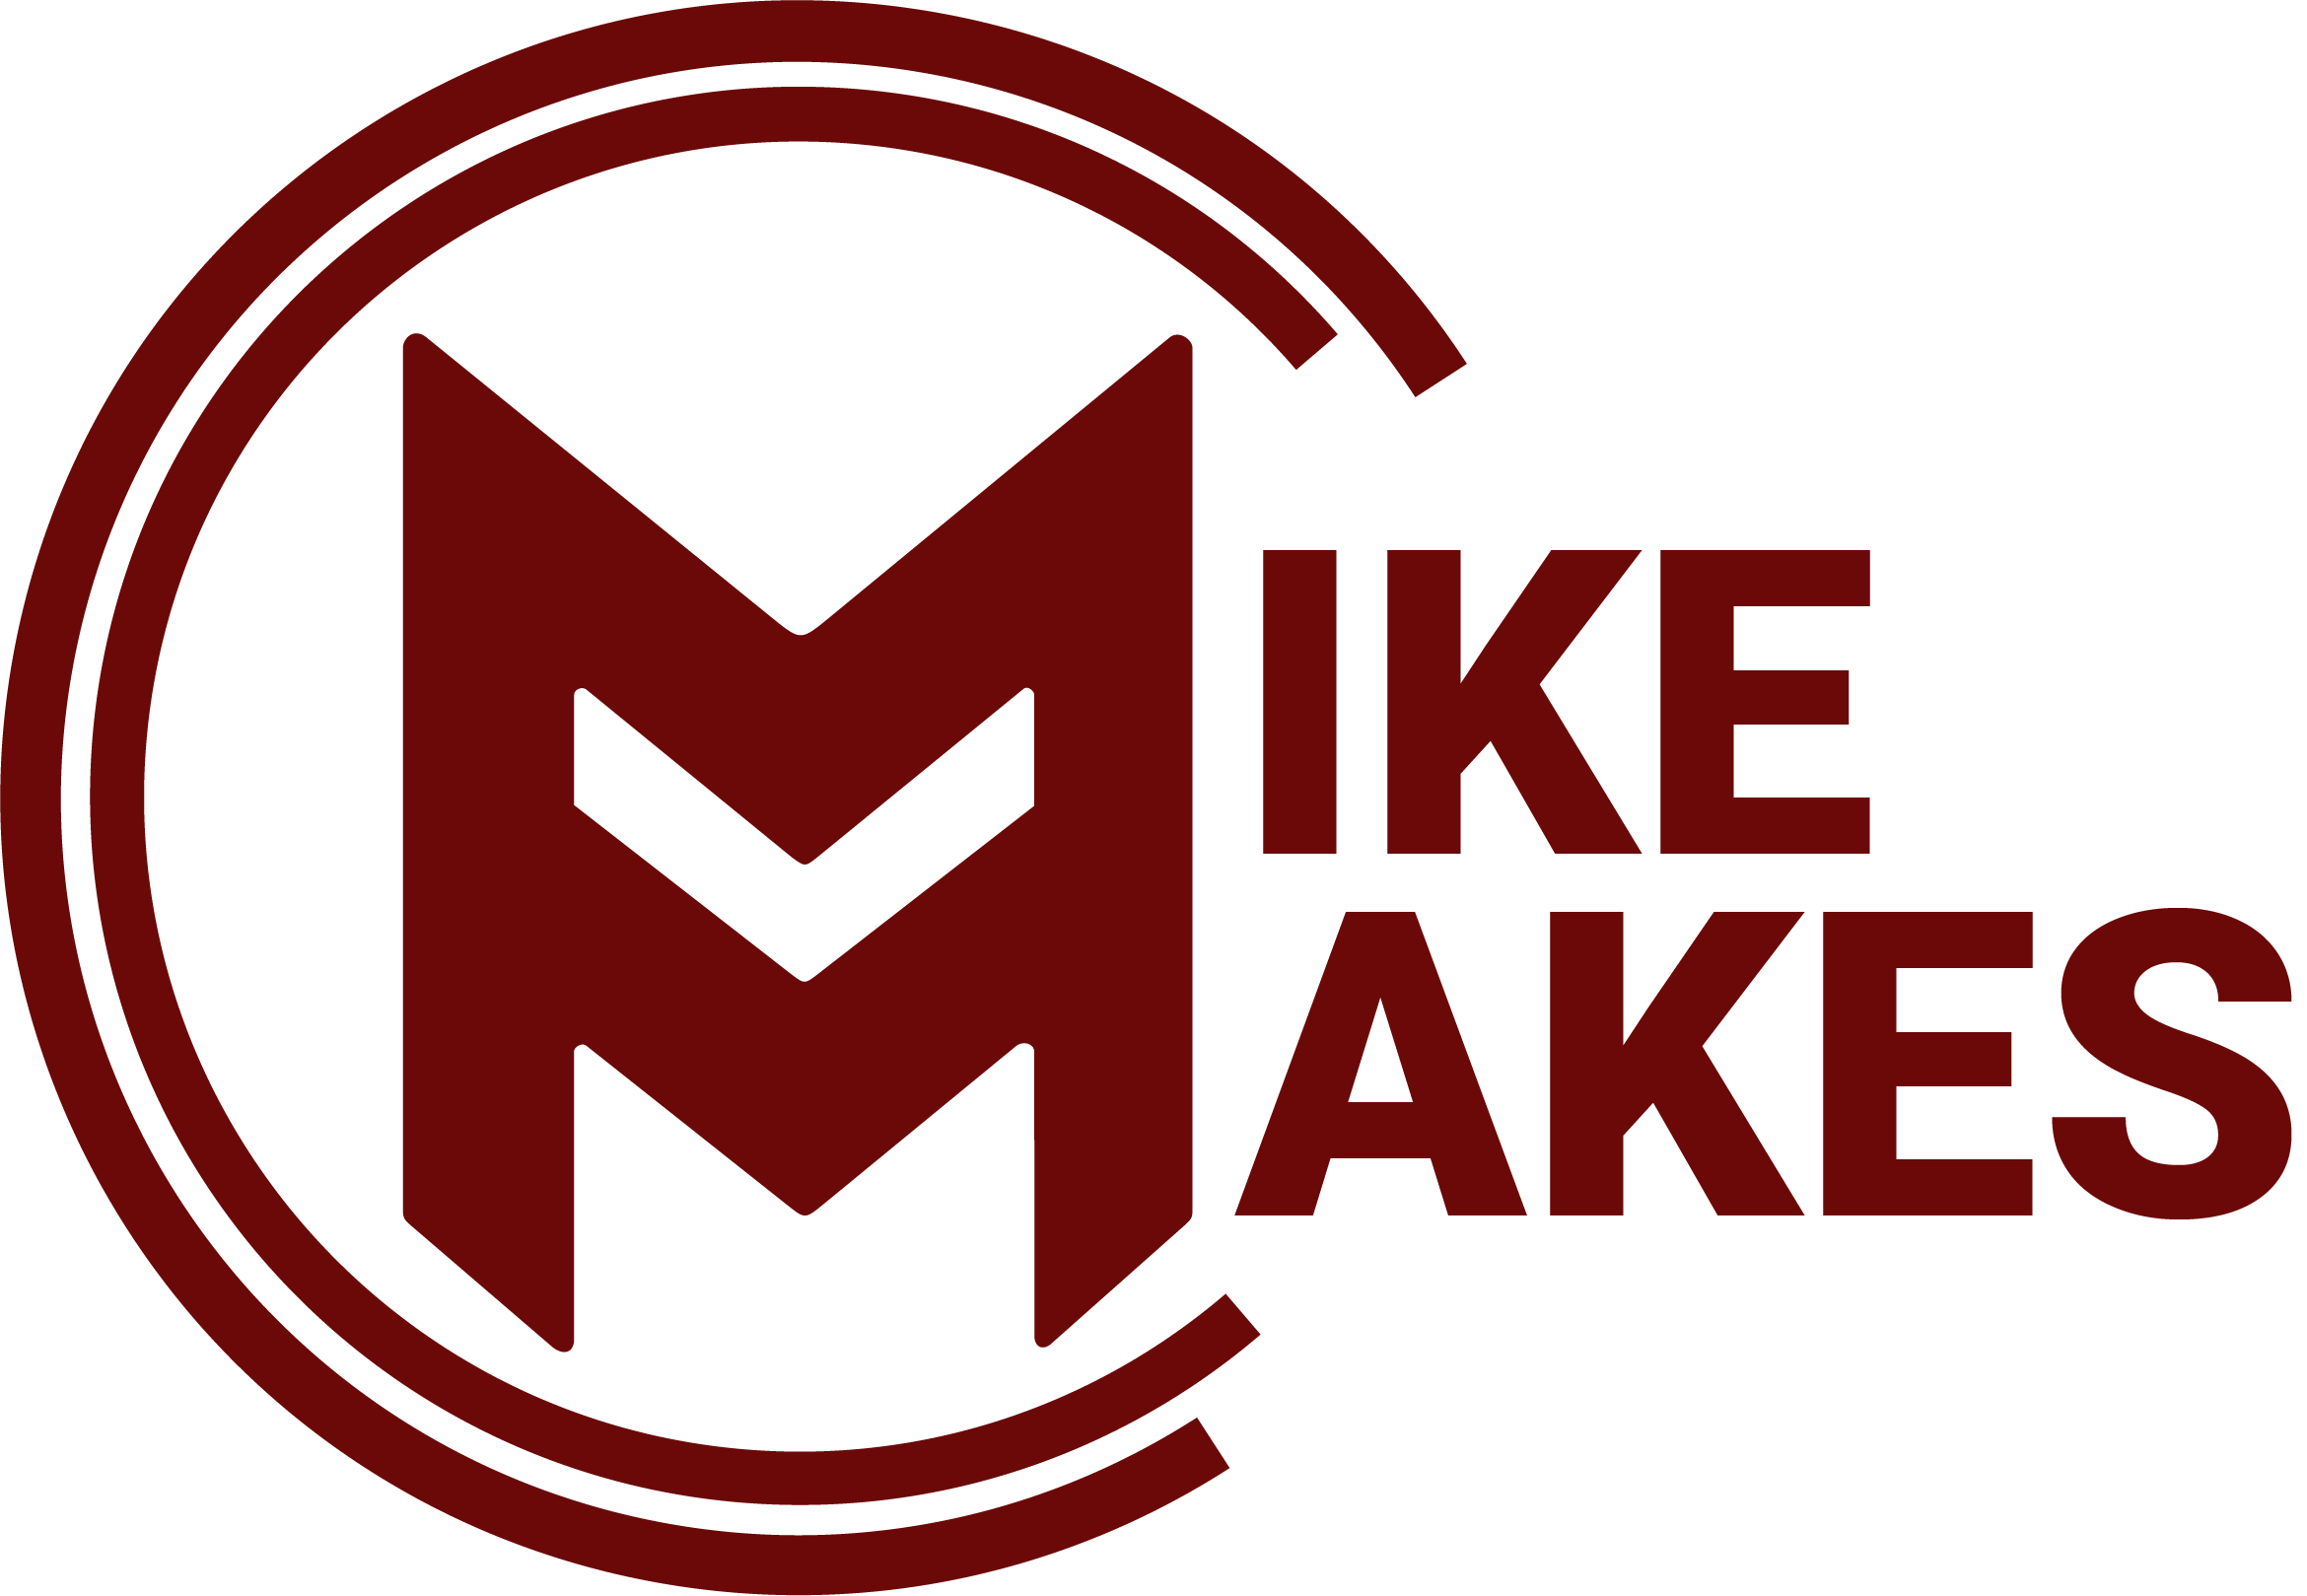 Mike Makes - Freelance Video & Animation